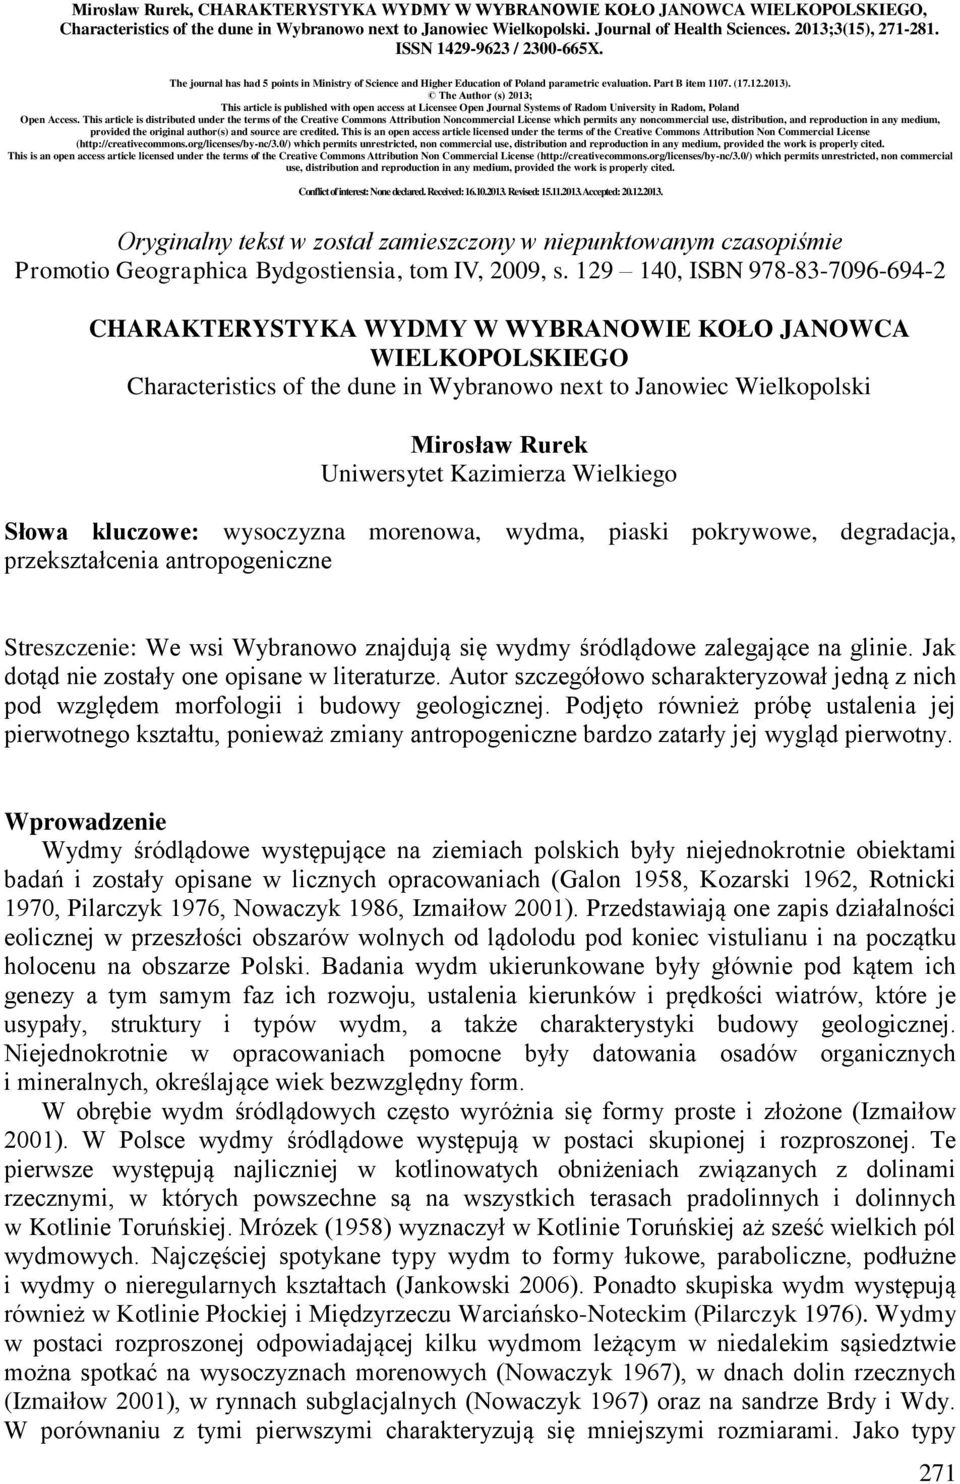 The Author (s) 2013; This article is published with open access at Licensee Open Journal Systems of Radom University in Radom, Poland Open Access.